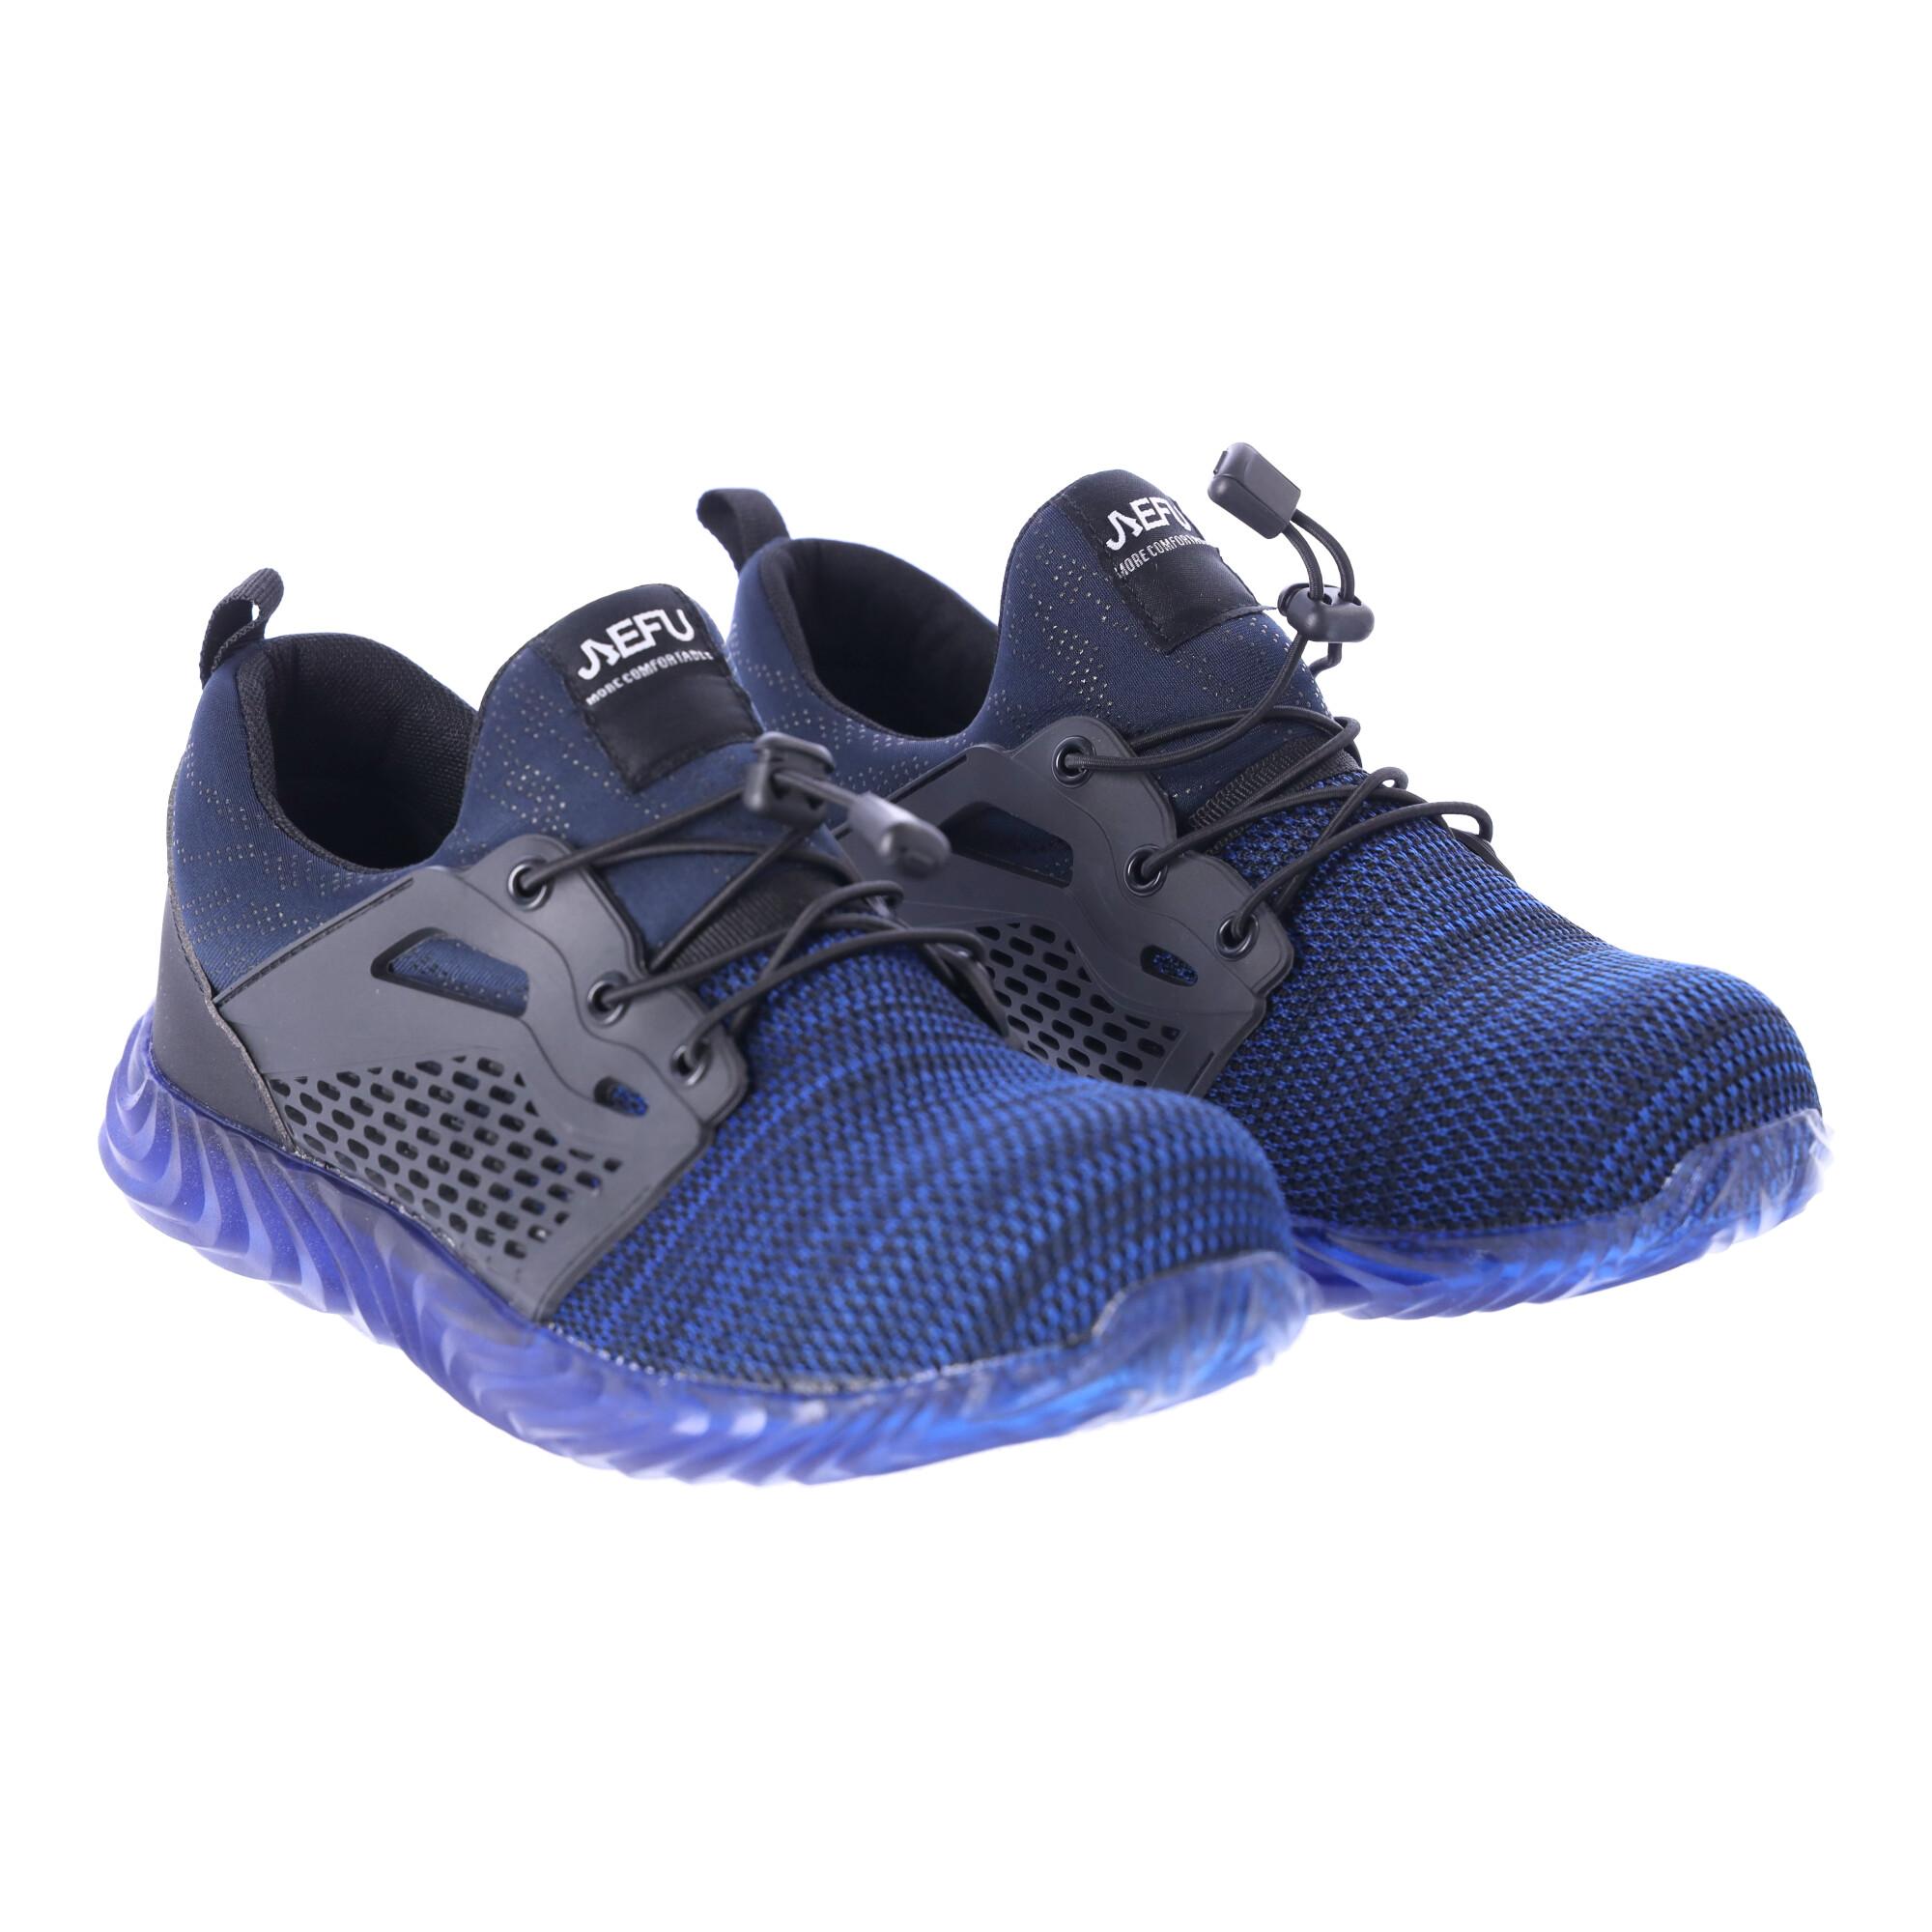 Work safety shoes "39" - navy blue